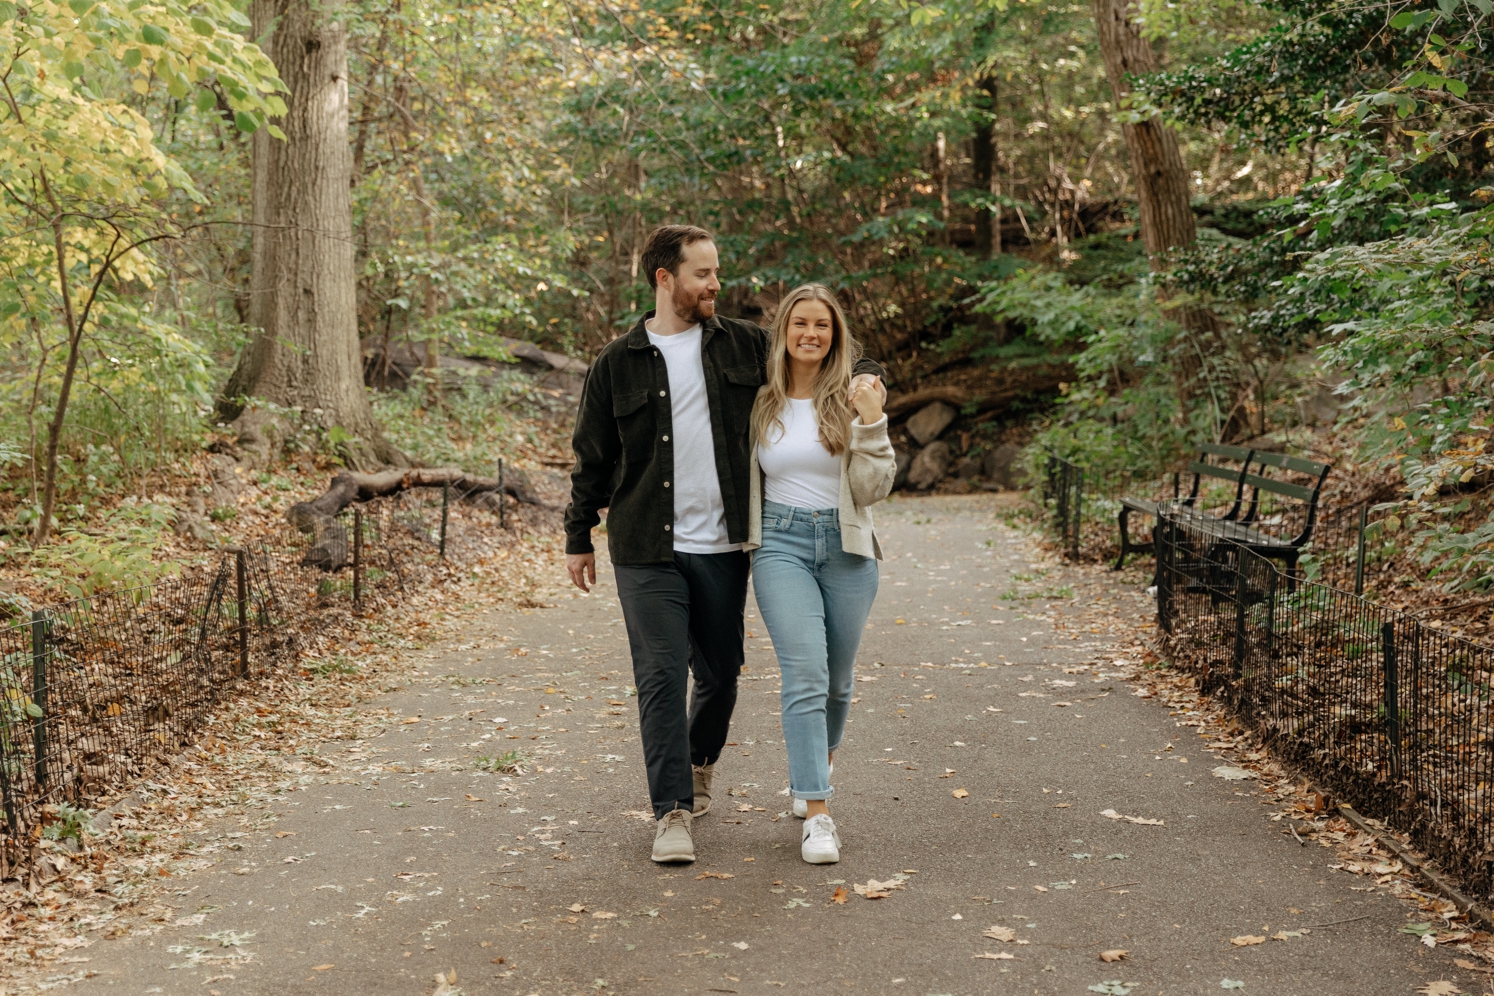 Newly engaged couple walking through Central Park during engagement shoot | McArthur Weddings and Events